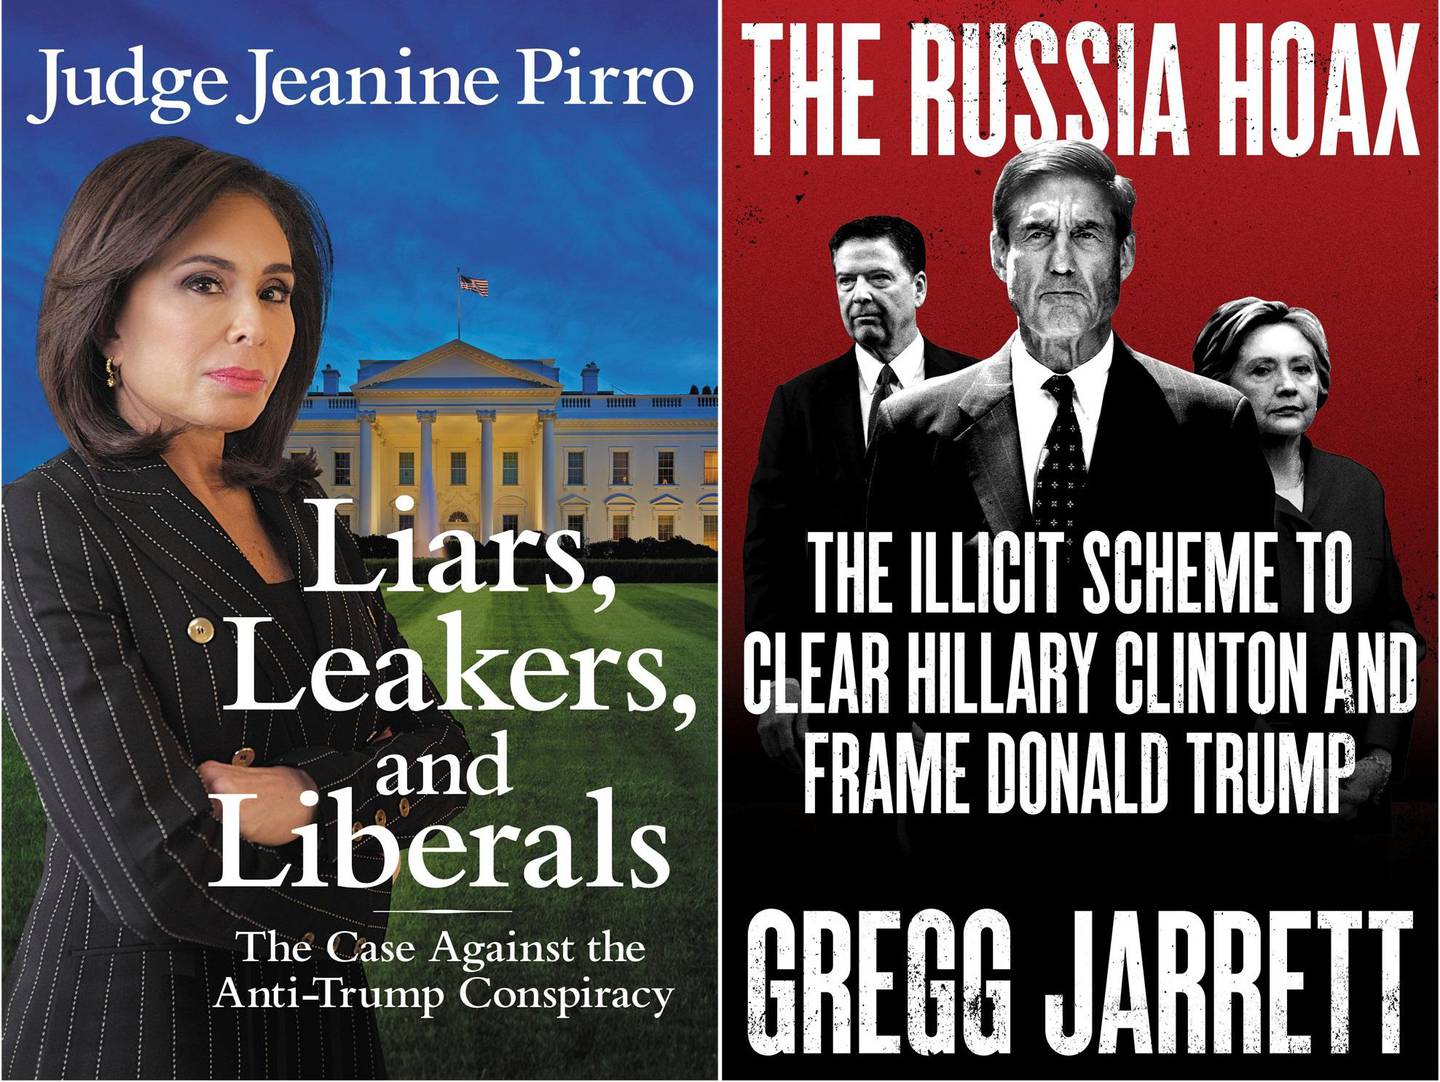 This combination photo of book cover images shows  "Liars, Leakers, and Liberals: The Case Against the Anti-Trump Conspiracy," by Jeanine Pirro, from left, "The Russia Hoax: The Illicit Scheme to Clear Hillary Clinton and Frame Donald Trump," by Gregg Jarrett and "The Briefing: Politics, The Press, and The President," by Sean Spicer. (AP Photo)